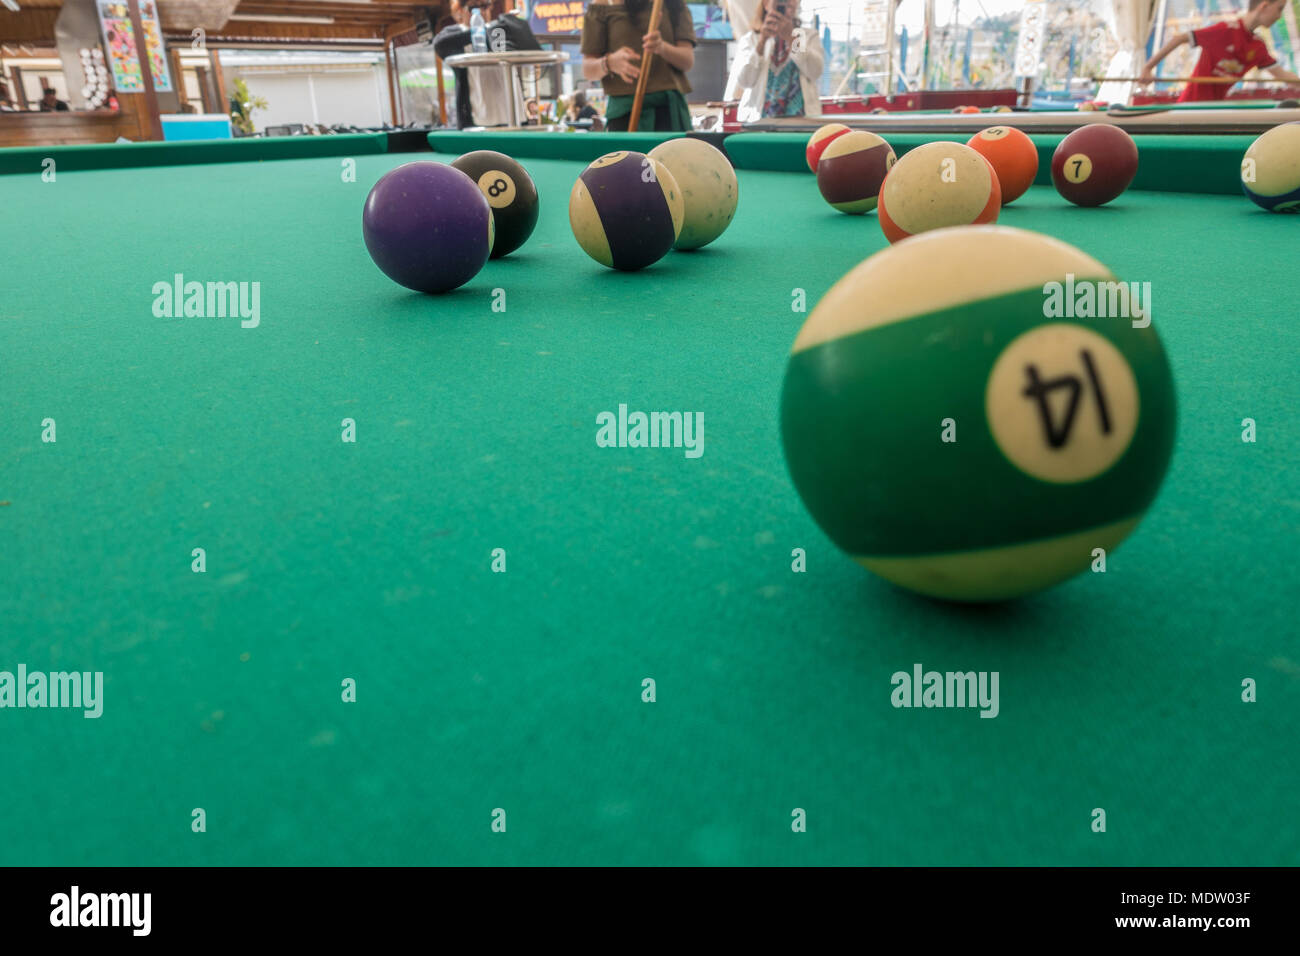 A close up view of balls on a pool table. Stock Photo